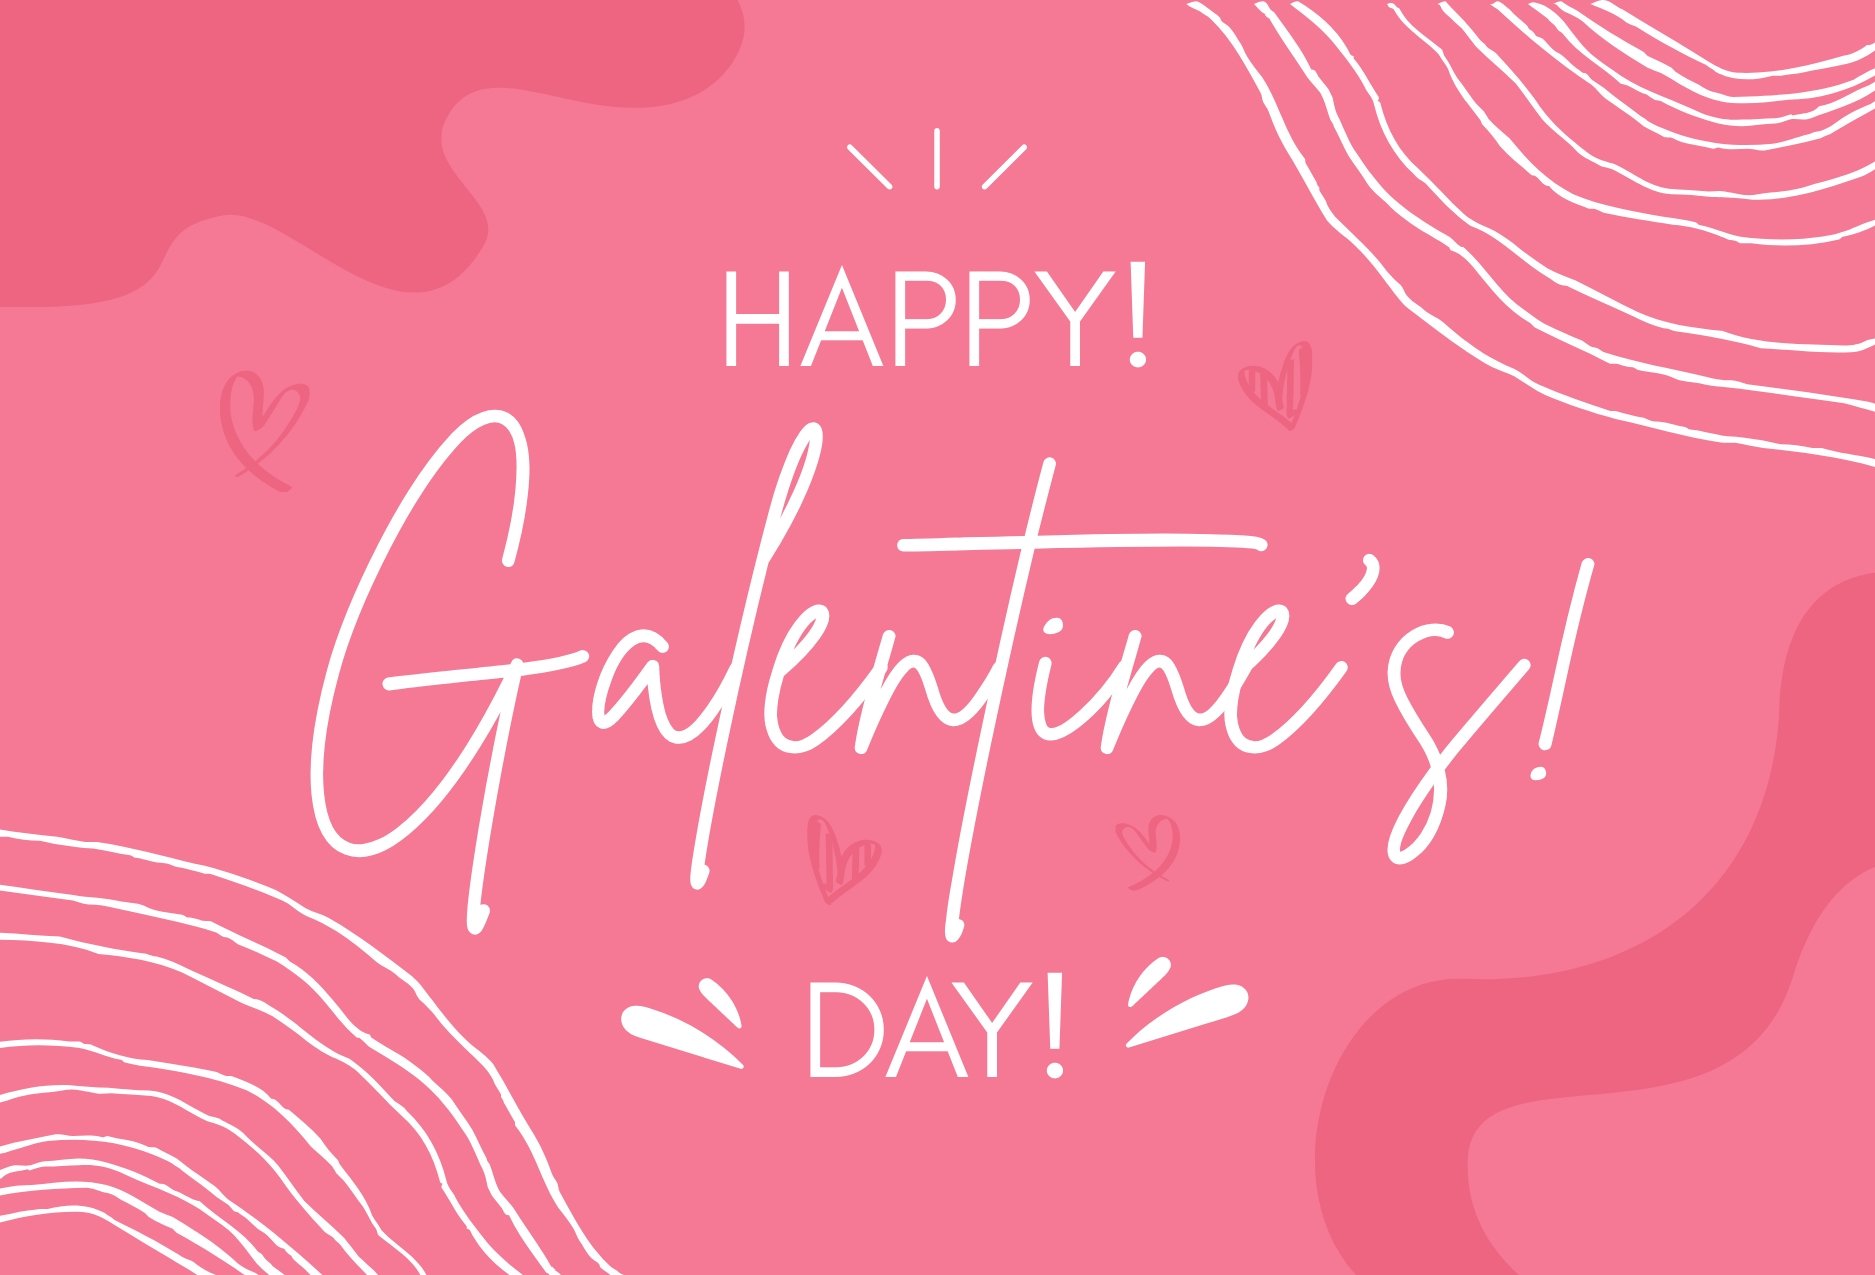 download-these-free-galentine-s-day-cards-for-your-best-baes-brit-co